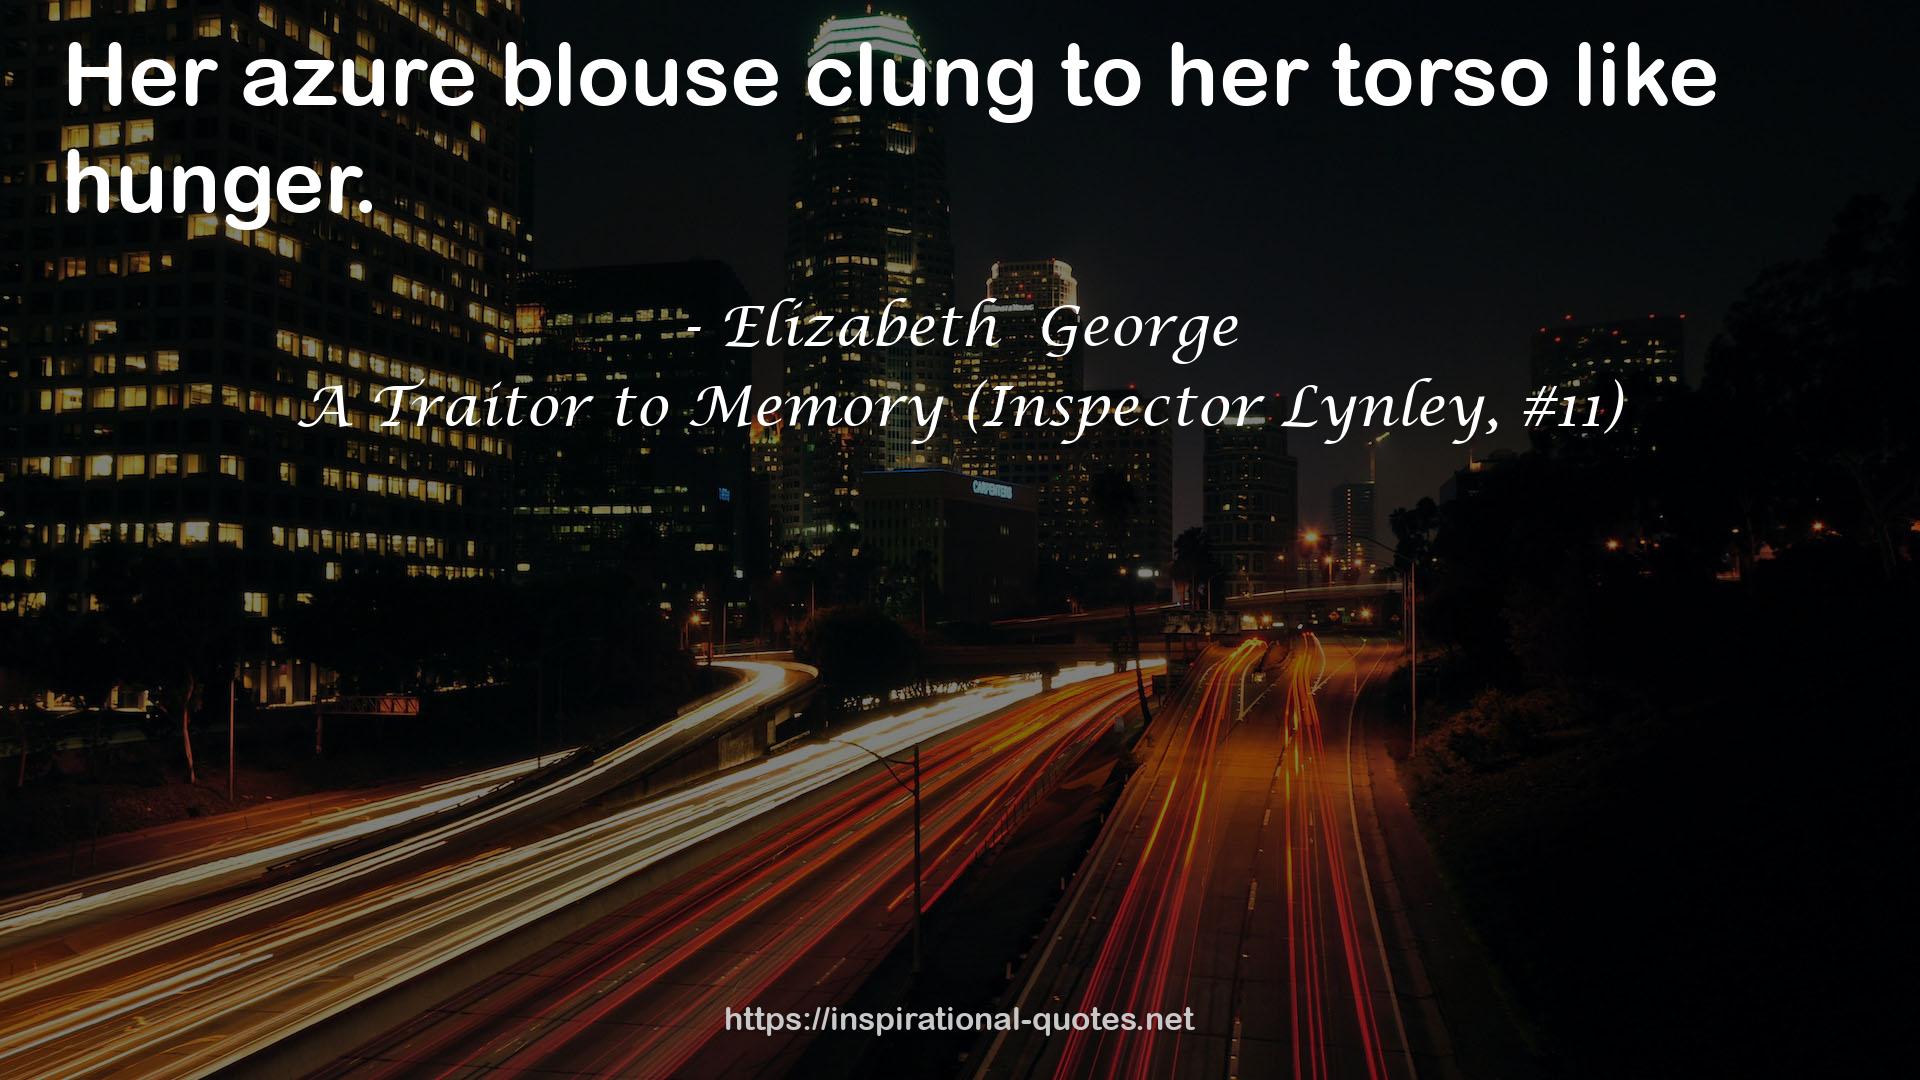 A Traitor to Memory (Inspector Lynley, #11) QUOTES